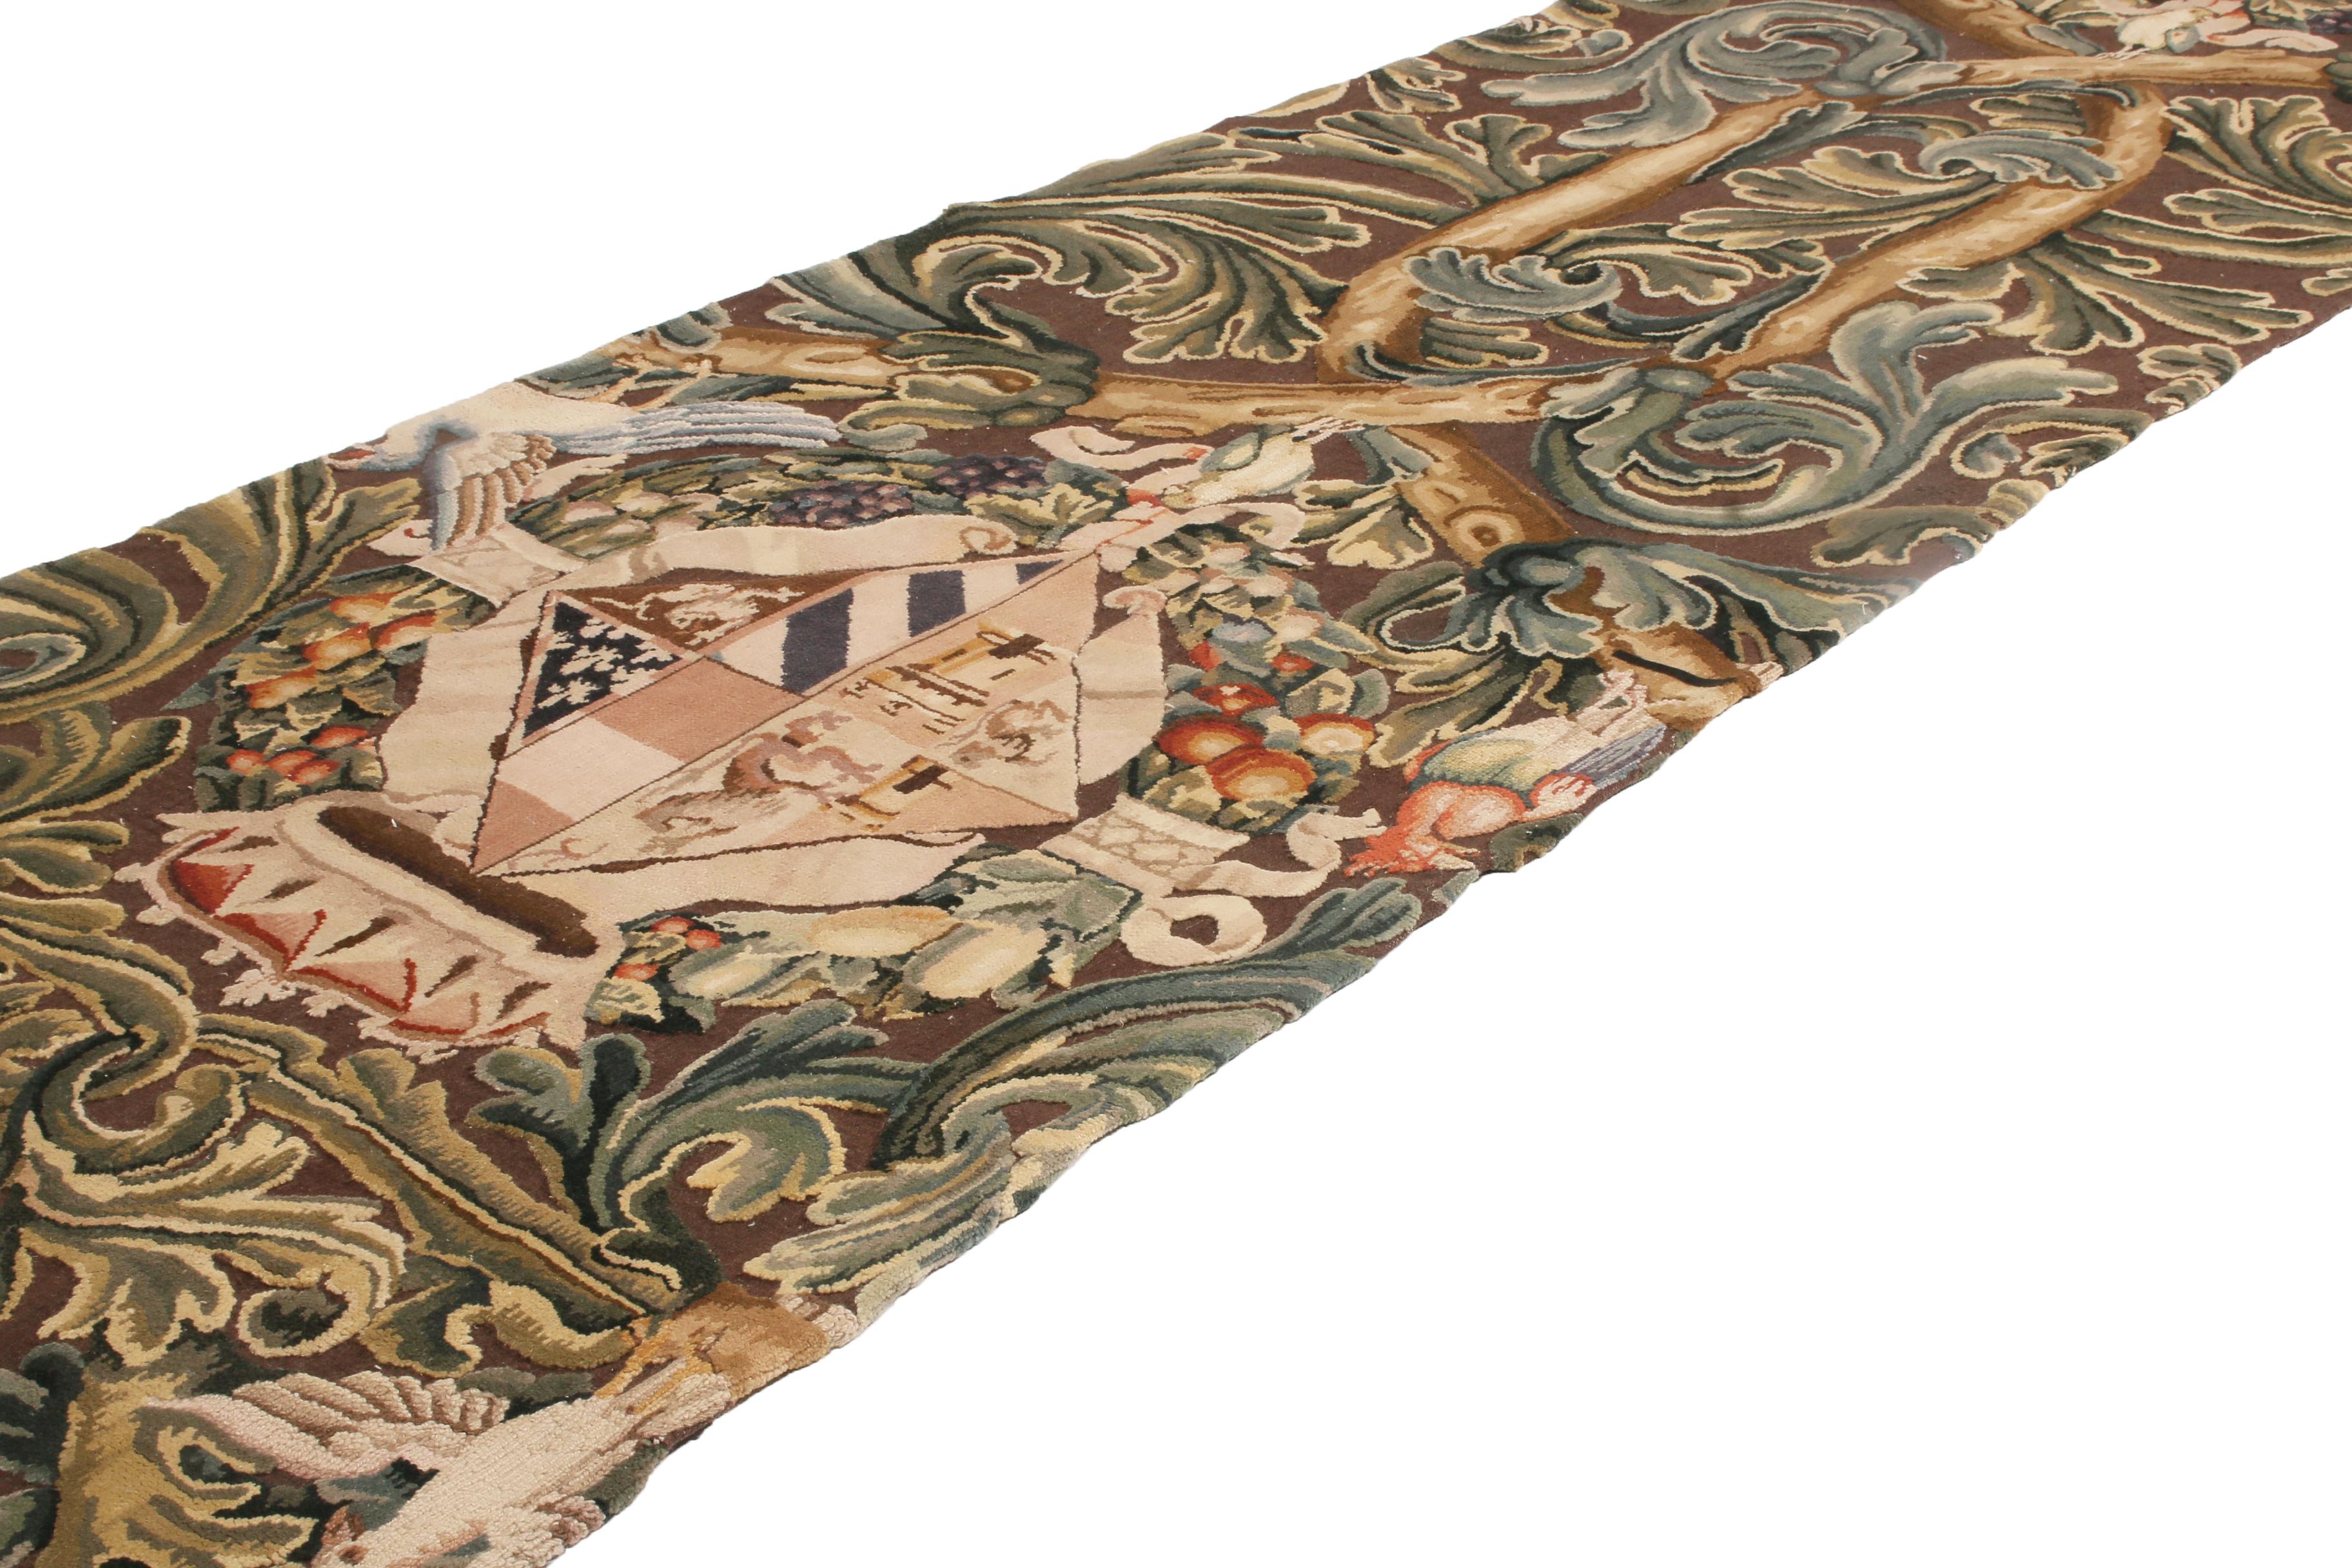 Originating from China, this hand knotted floral runner was inspired by antique and vintage Tudor floral designs, embracing a borderless, all over field design with sweapping curvilinear green floral garlands against a neoclassical brown background;